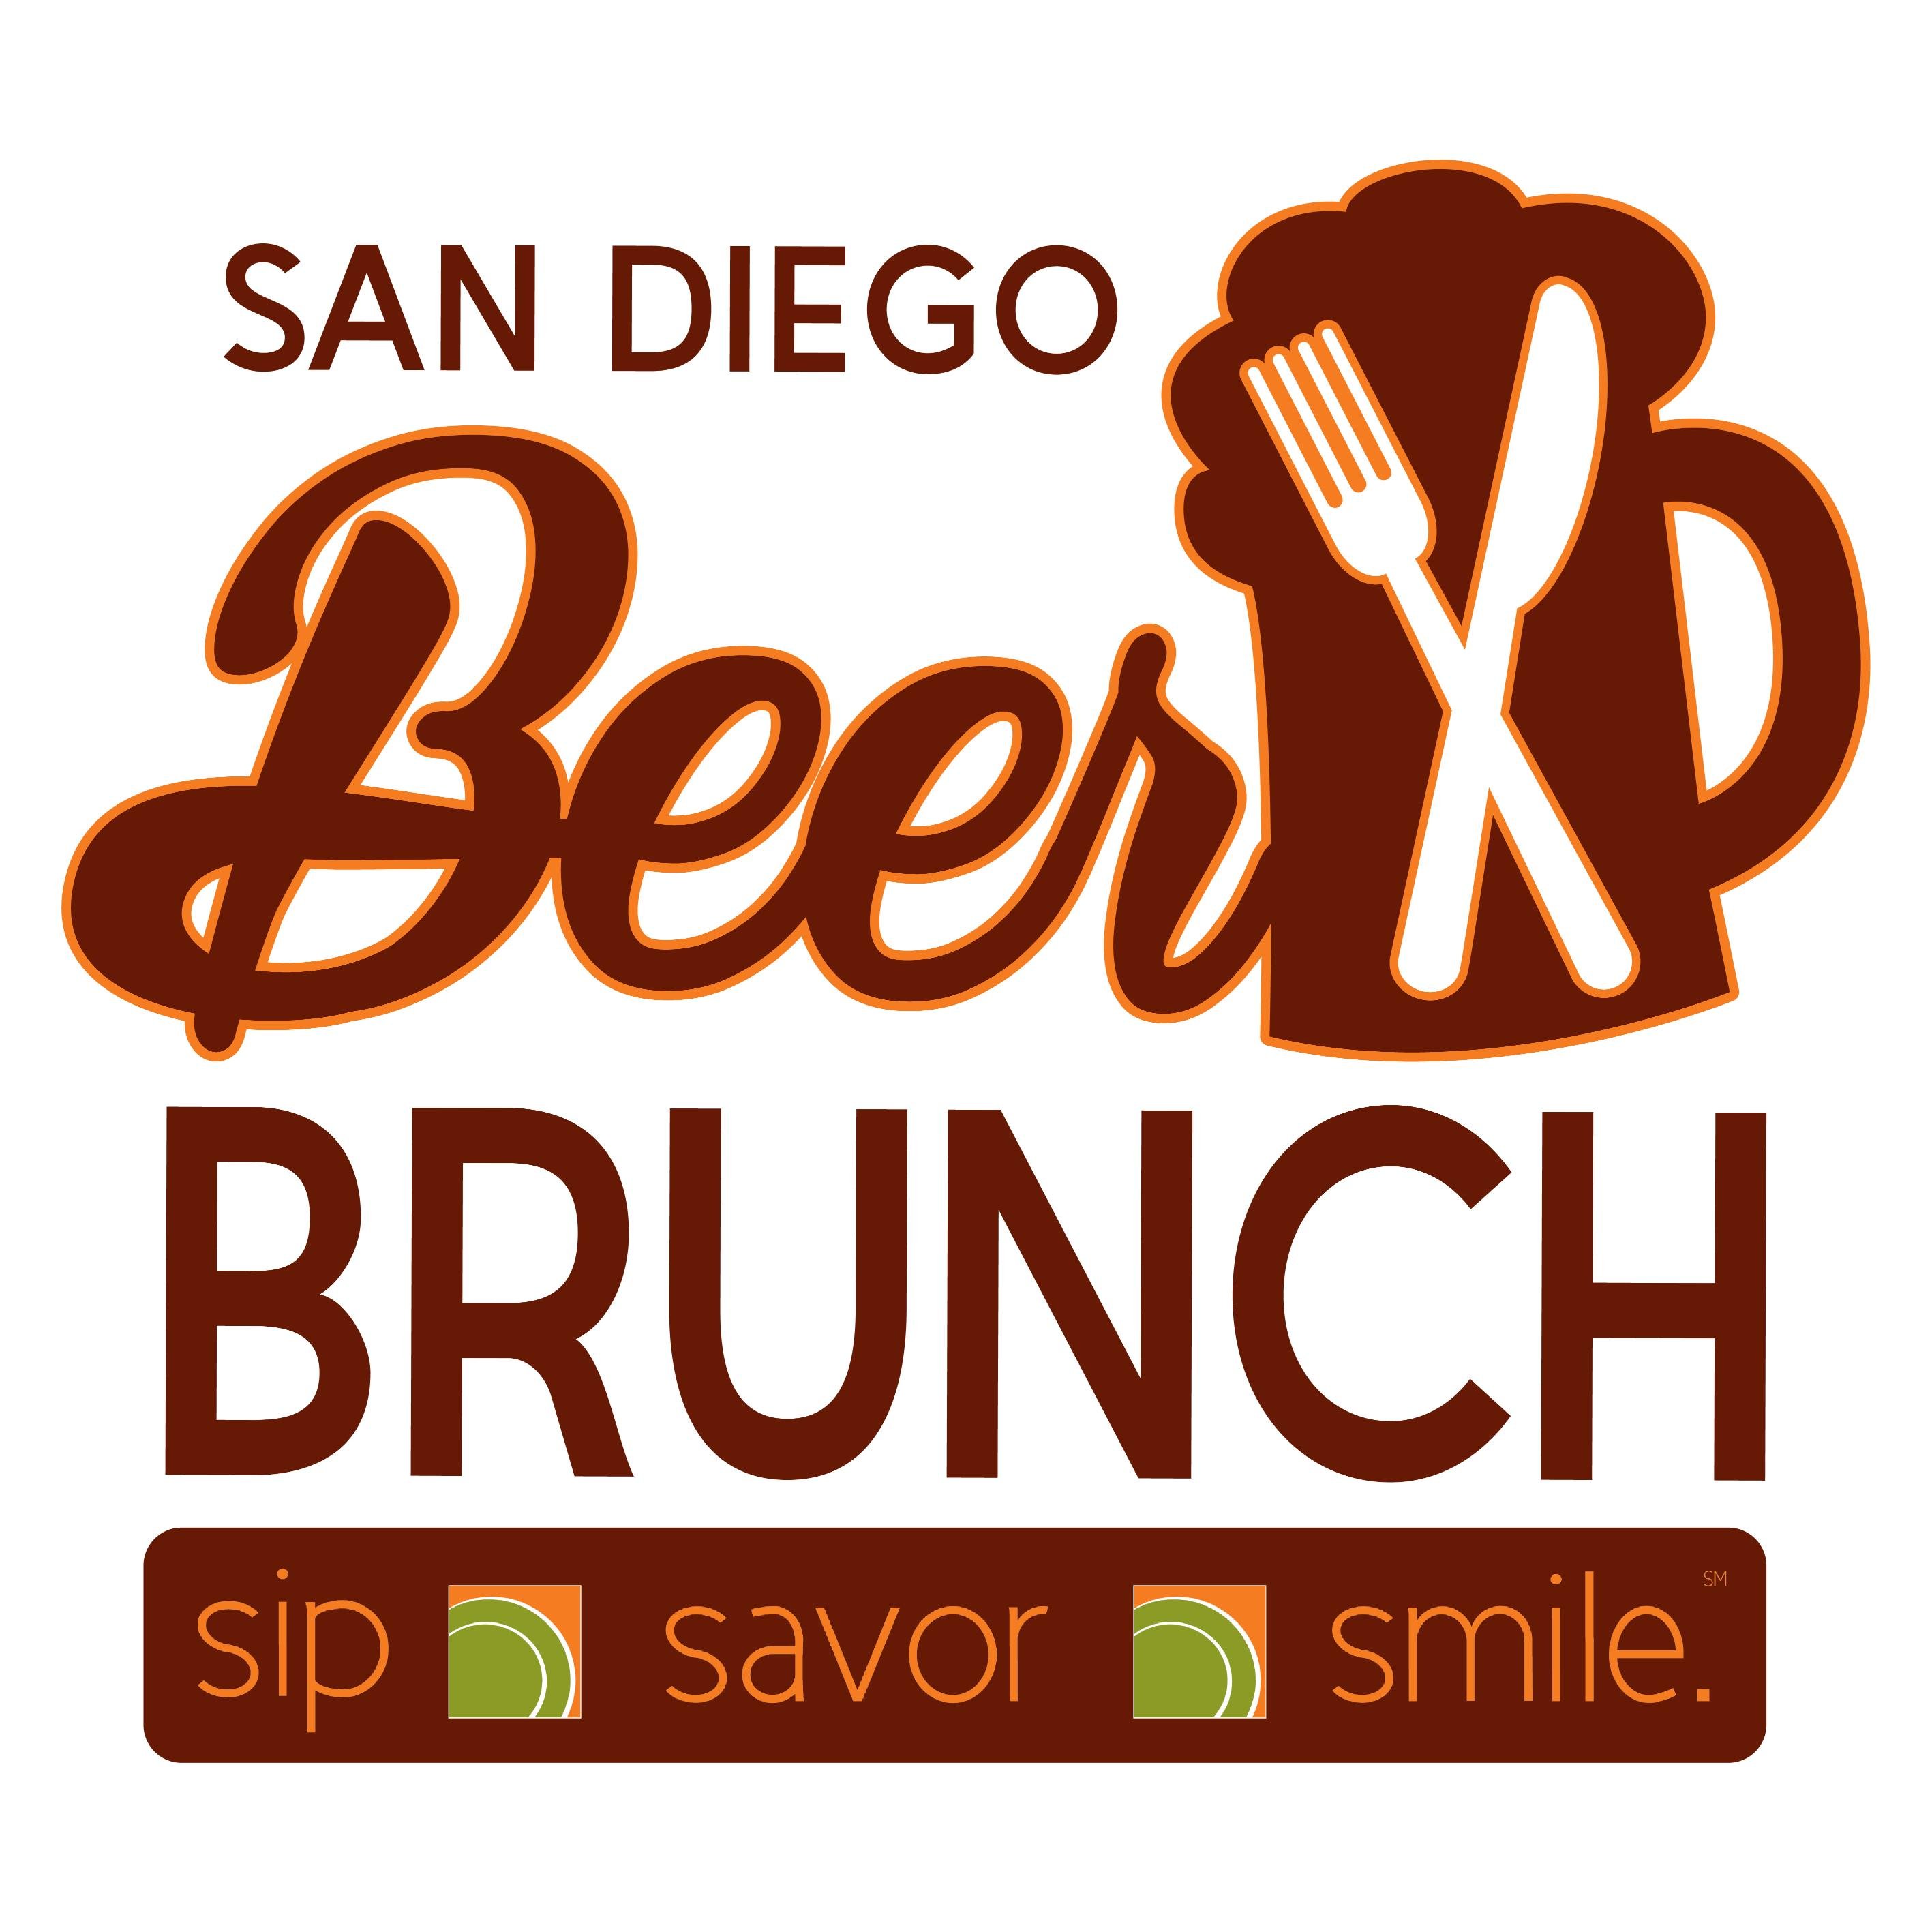 San Diego Beer Brunch pairs everyone's favorite meal with San Diego's best beers. Visit http://t.co/MpdHj36esG for a list of upcoming events, menus & more!